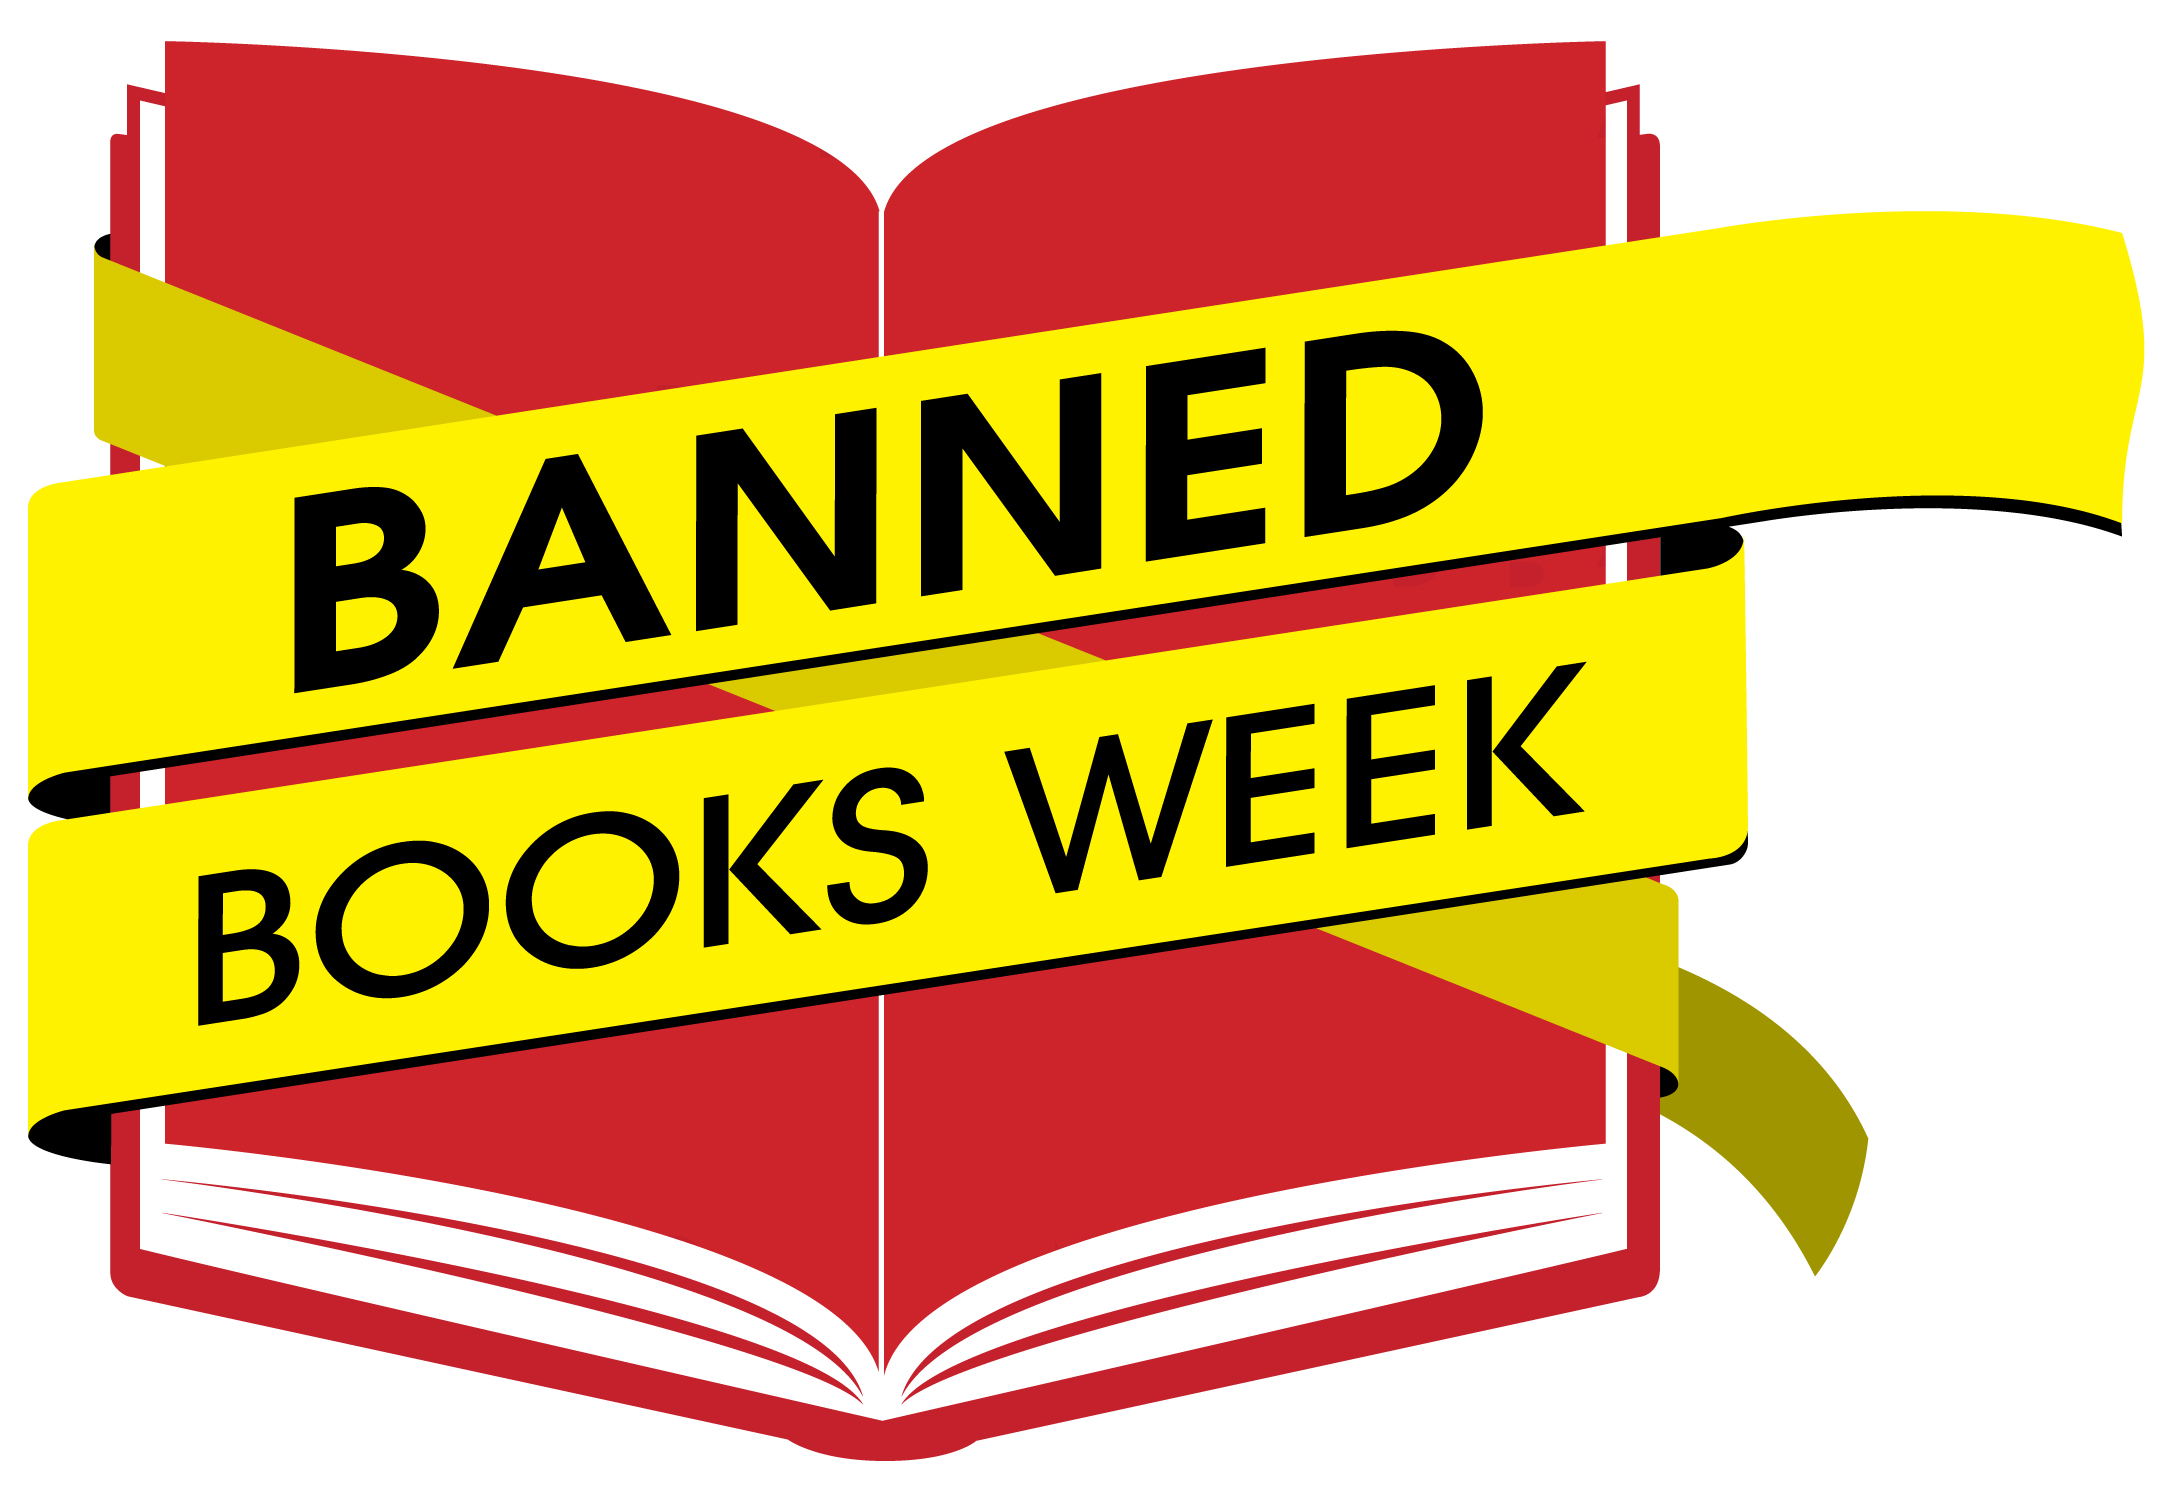 Banned books week poster